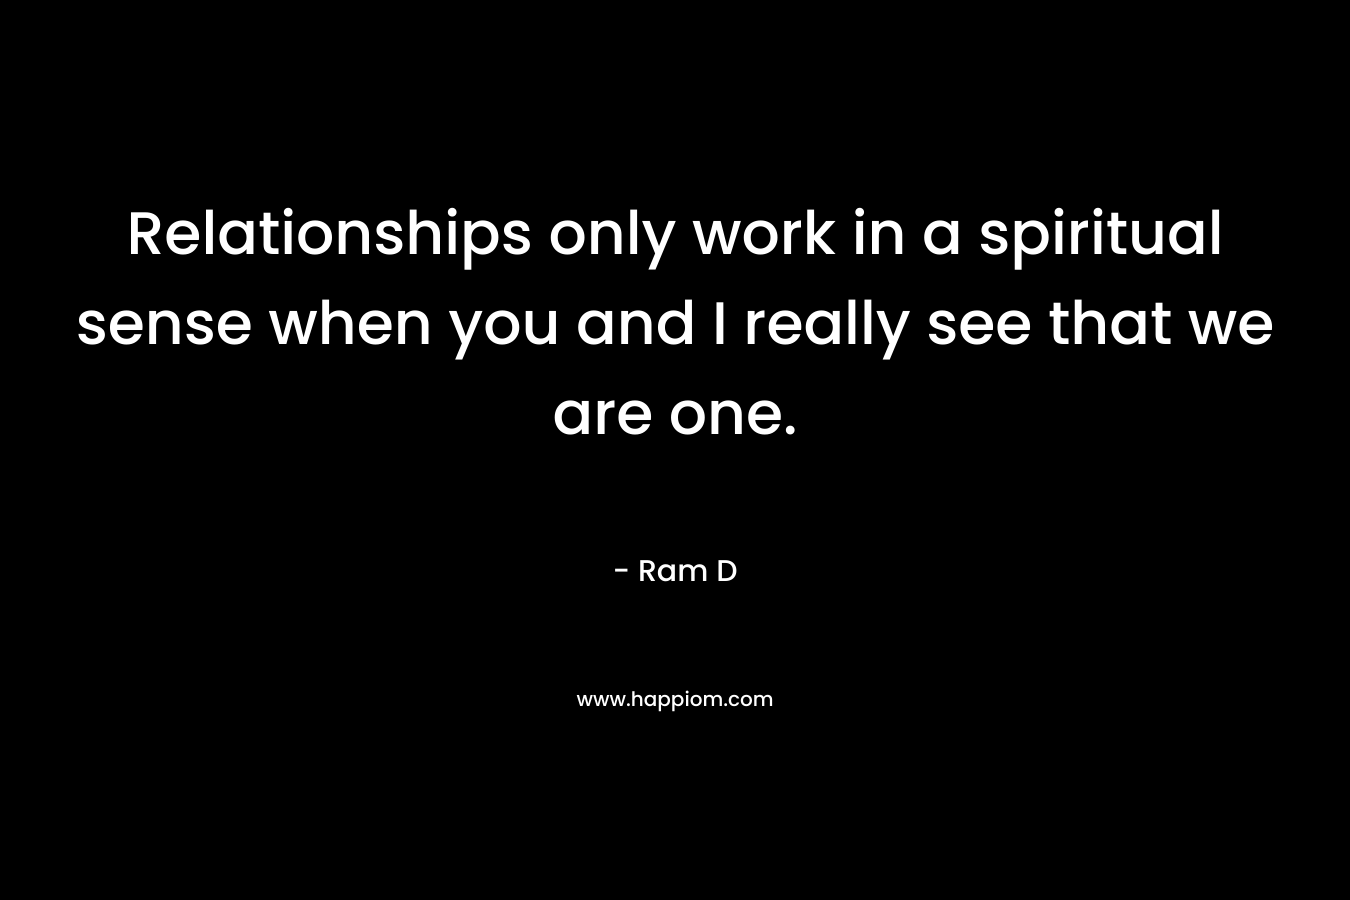 Relationships only work in a spiritual sense when you and I really see that we are one.